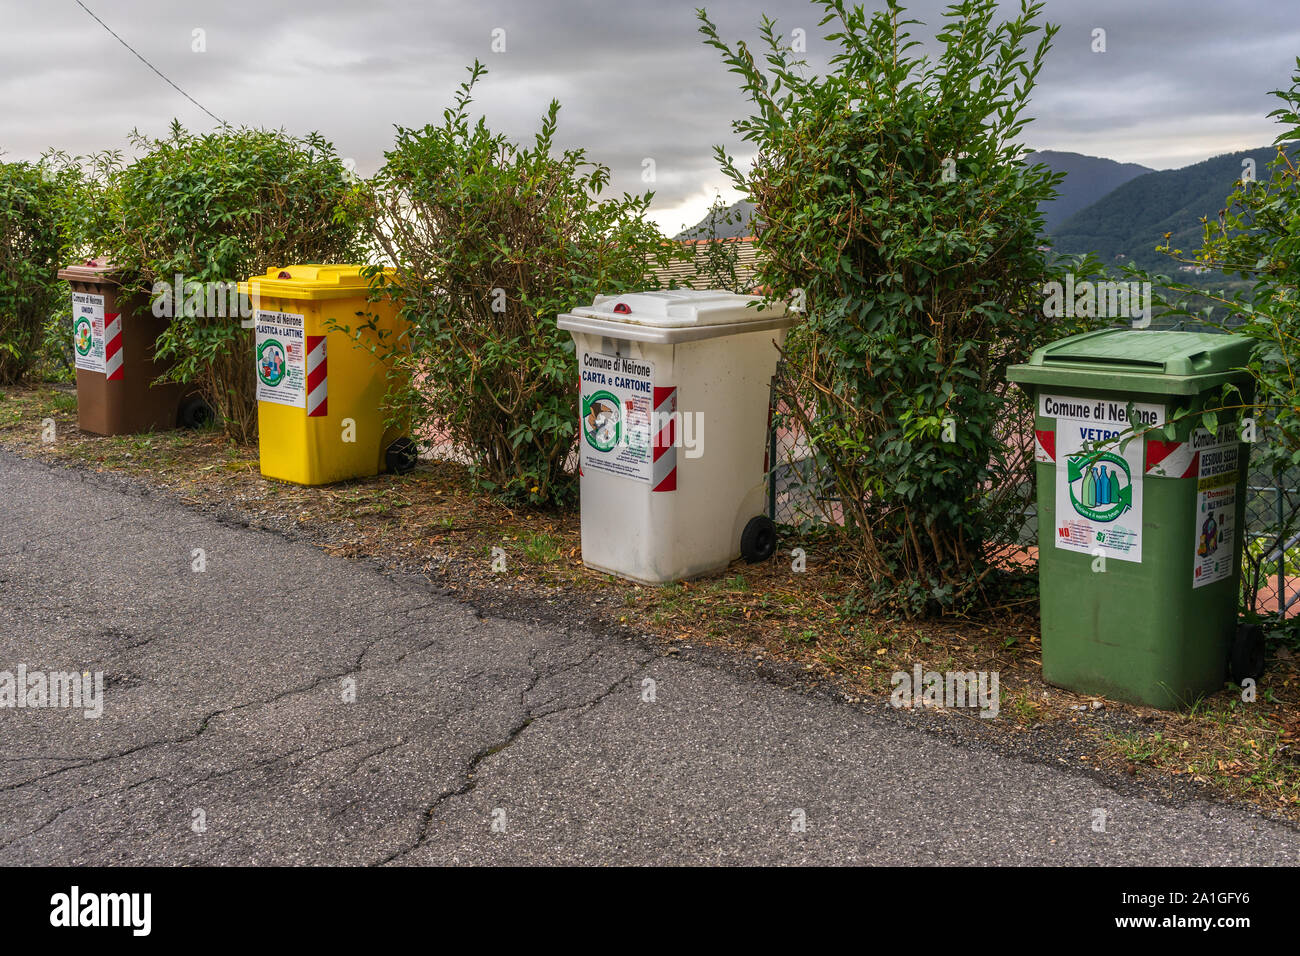 Recycling Bins In Italy High Resolution Stock Photography And Images - Alamy